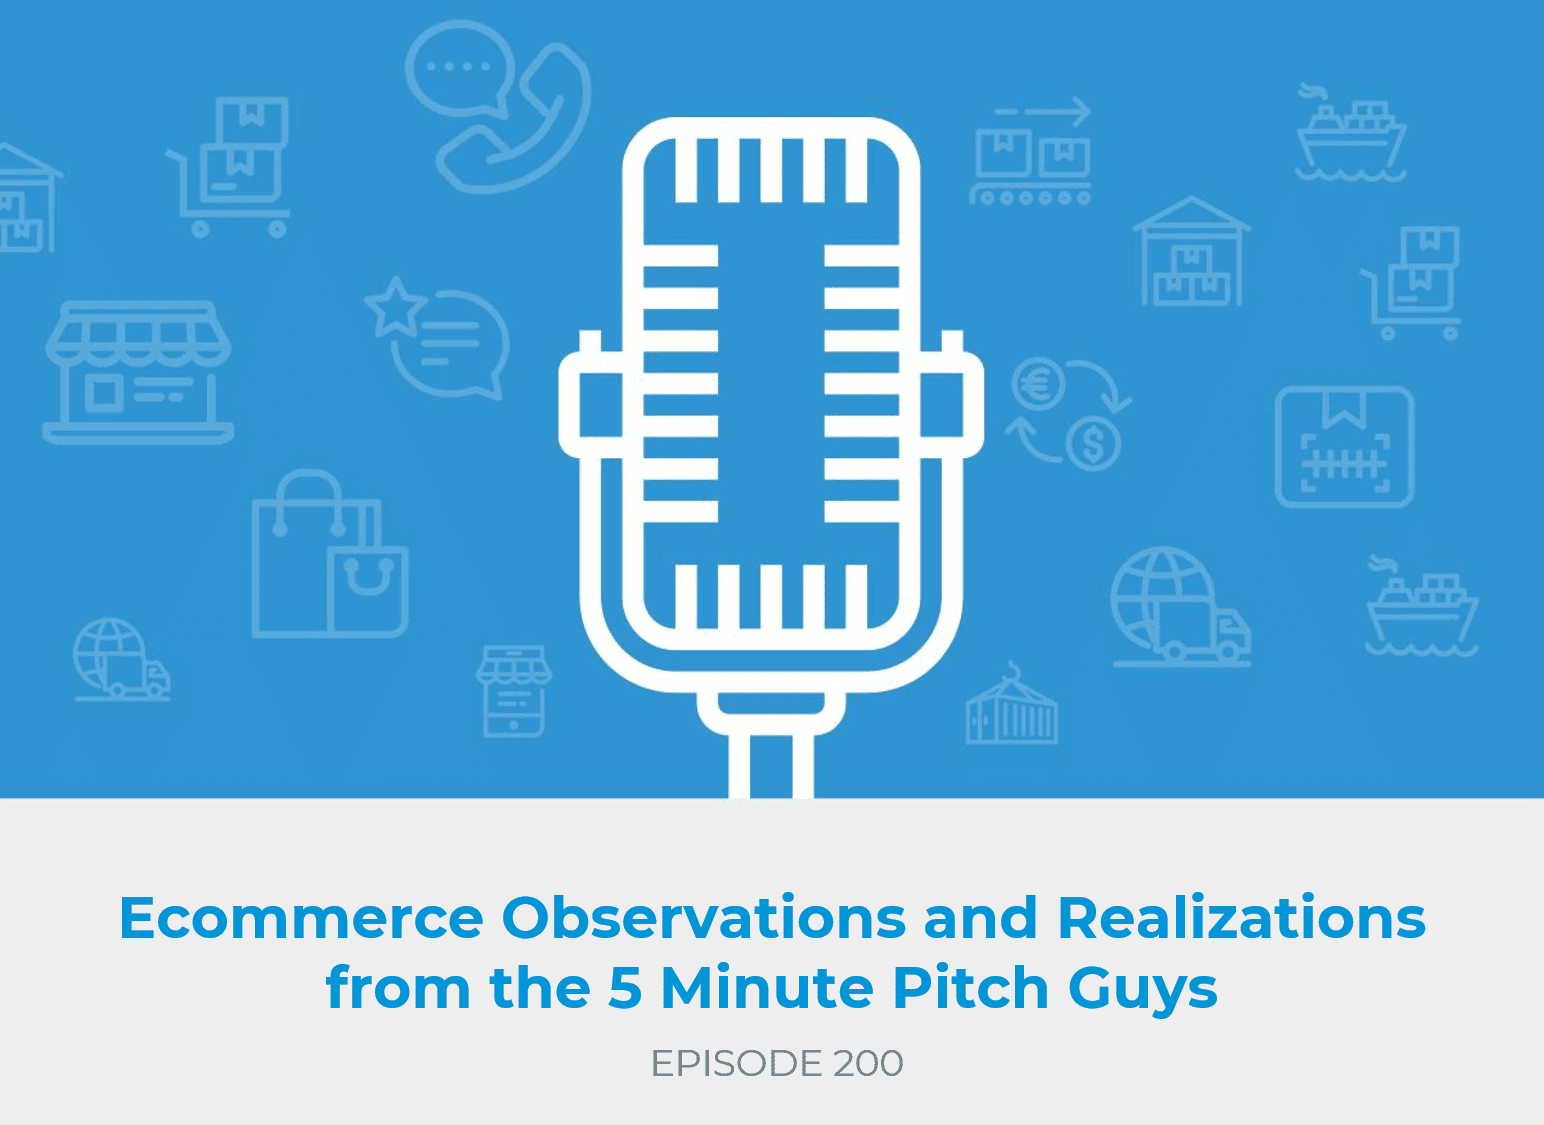 Ecommerce Observations and Realizations from 5 Minute Pitch Guys